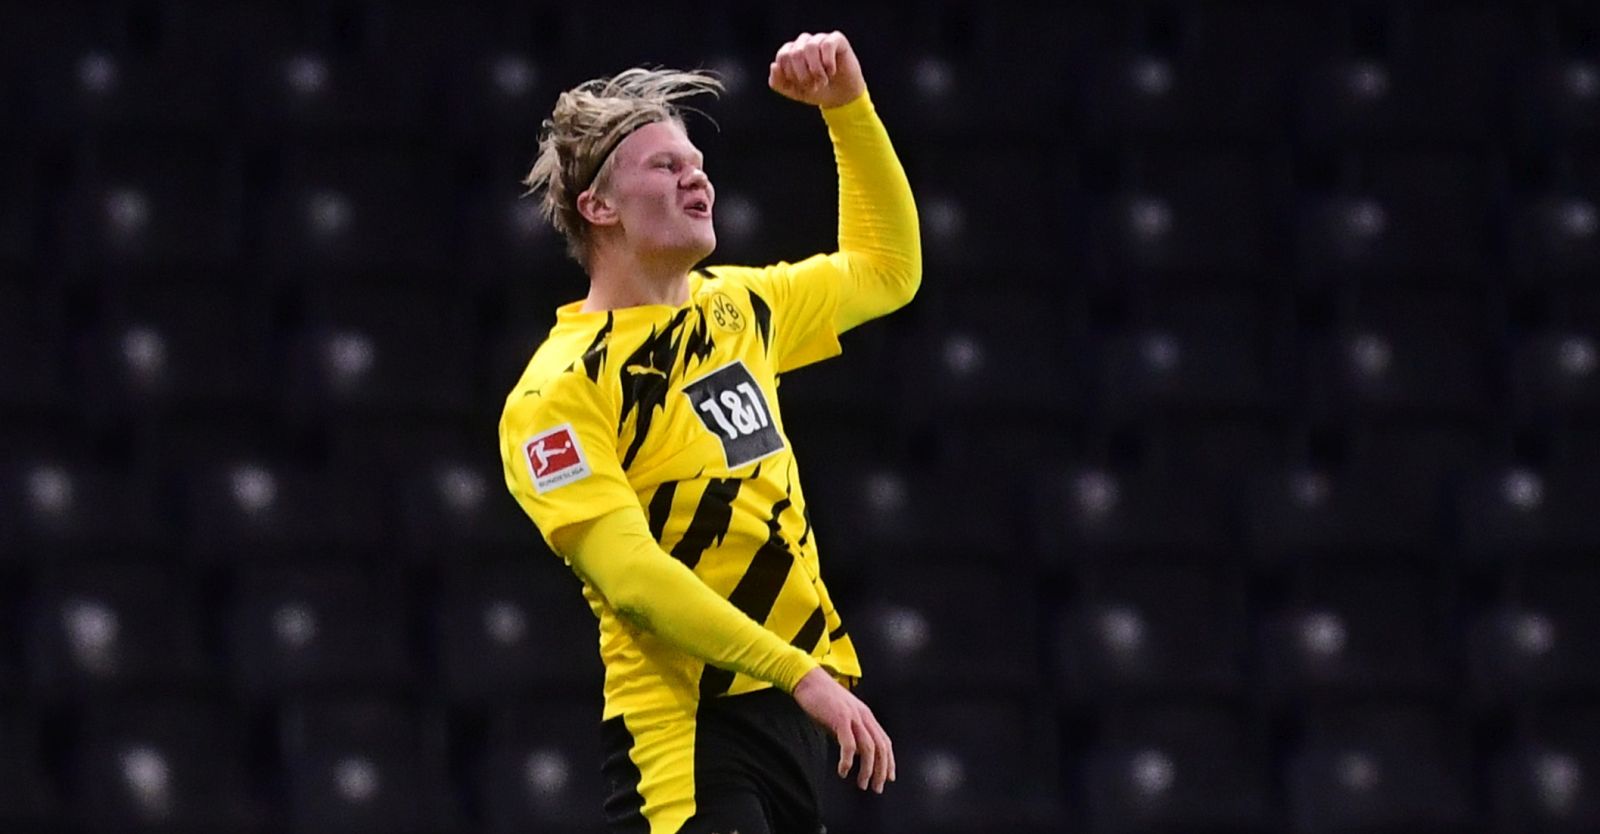 epa08834869 Dortmund's Erling Haaland celebrates his 2-5 goal during the German Bundesliga soccer match between Hertha BSC Berlin and Borussia Dortmund in Berlin, Germany, 21 November 2020.  EPA/CLEMENS BILAN / POOL CONDITIONS - ATTENTION: The DFL regulations prohibit any use of photographs as image sequences and/or quasi-video.